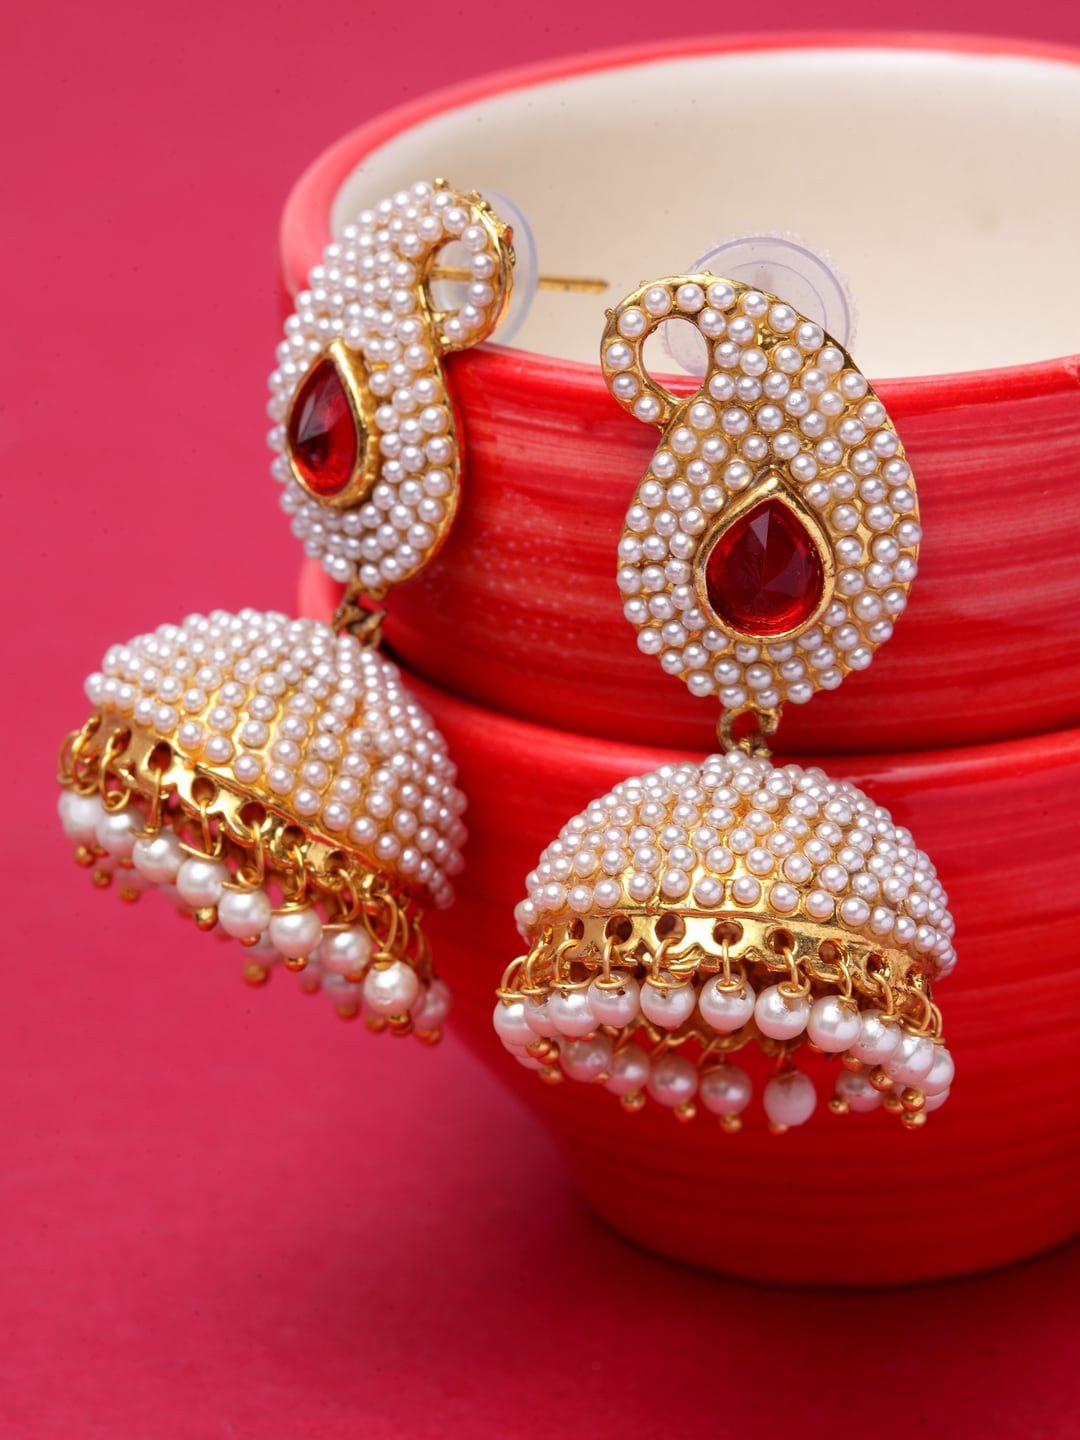 anikas creation off-white & gold-toned dome shaped jhumkas